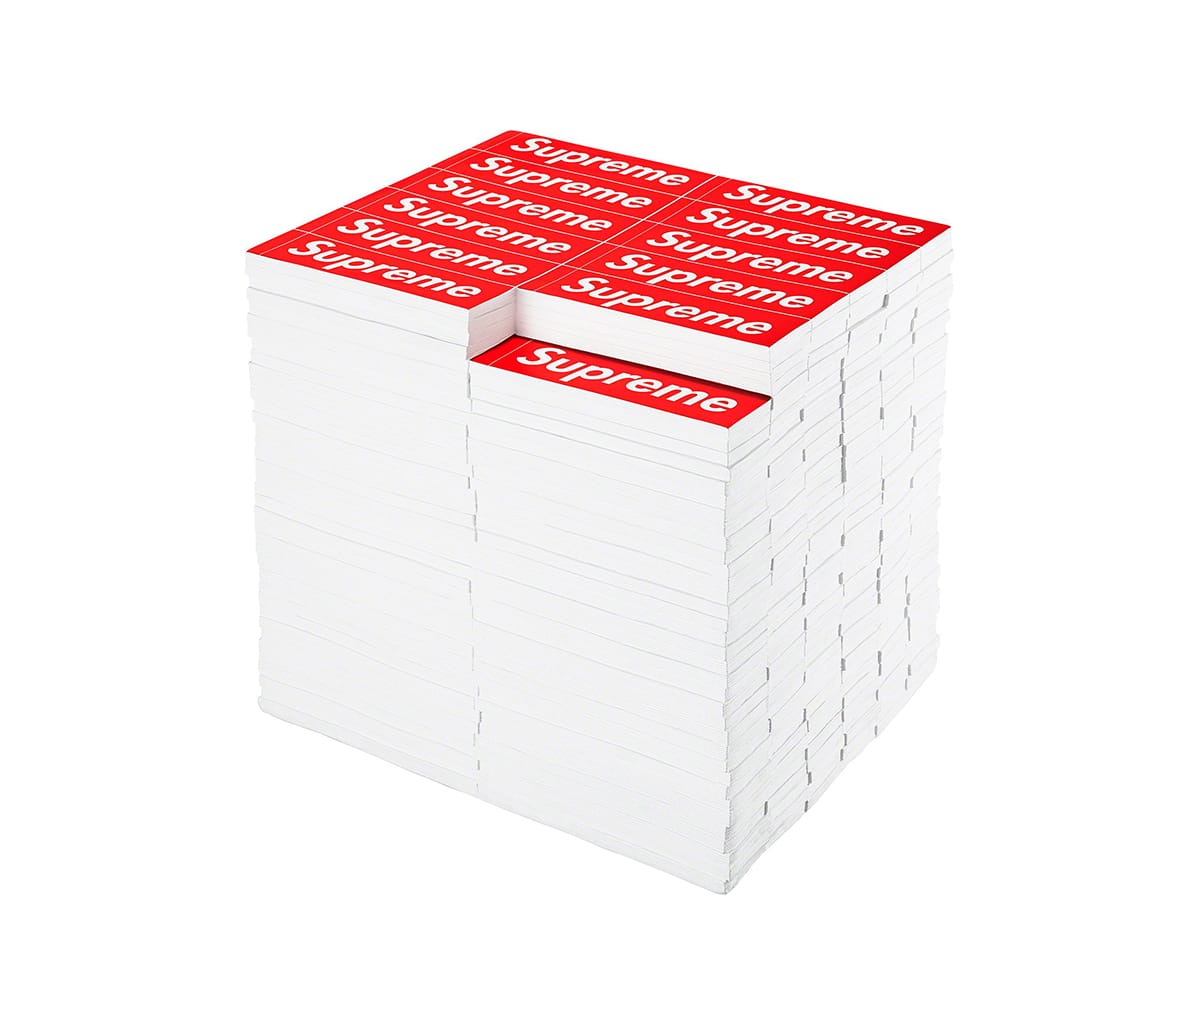 Supreme Rotary Hero Sticker Bricks Stool Side Table Red - Section 